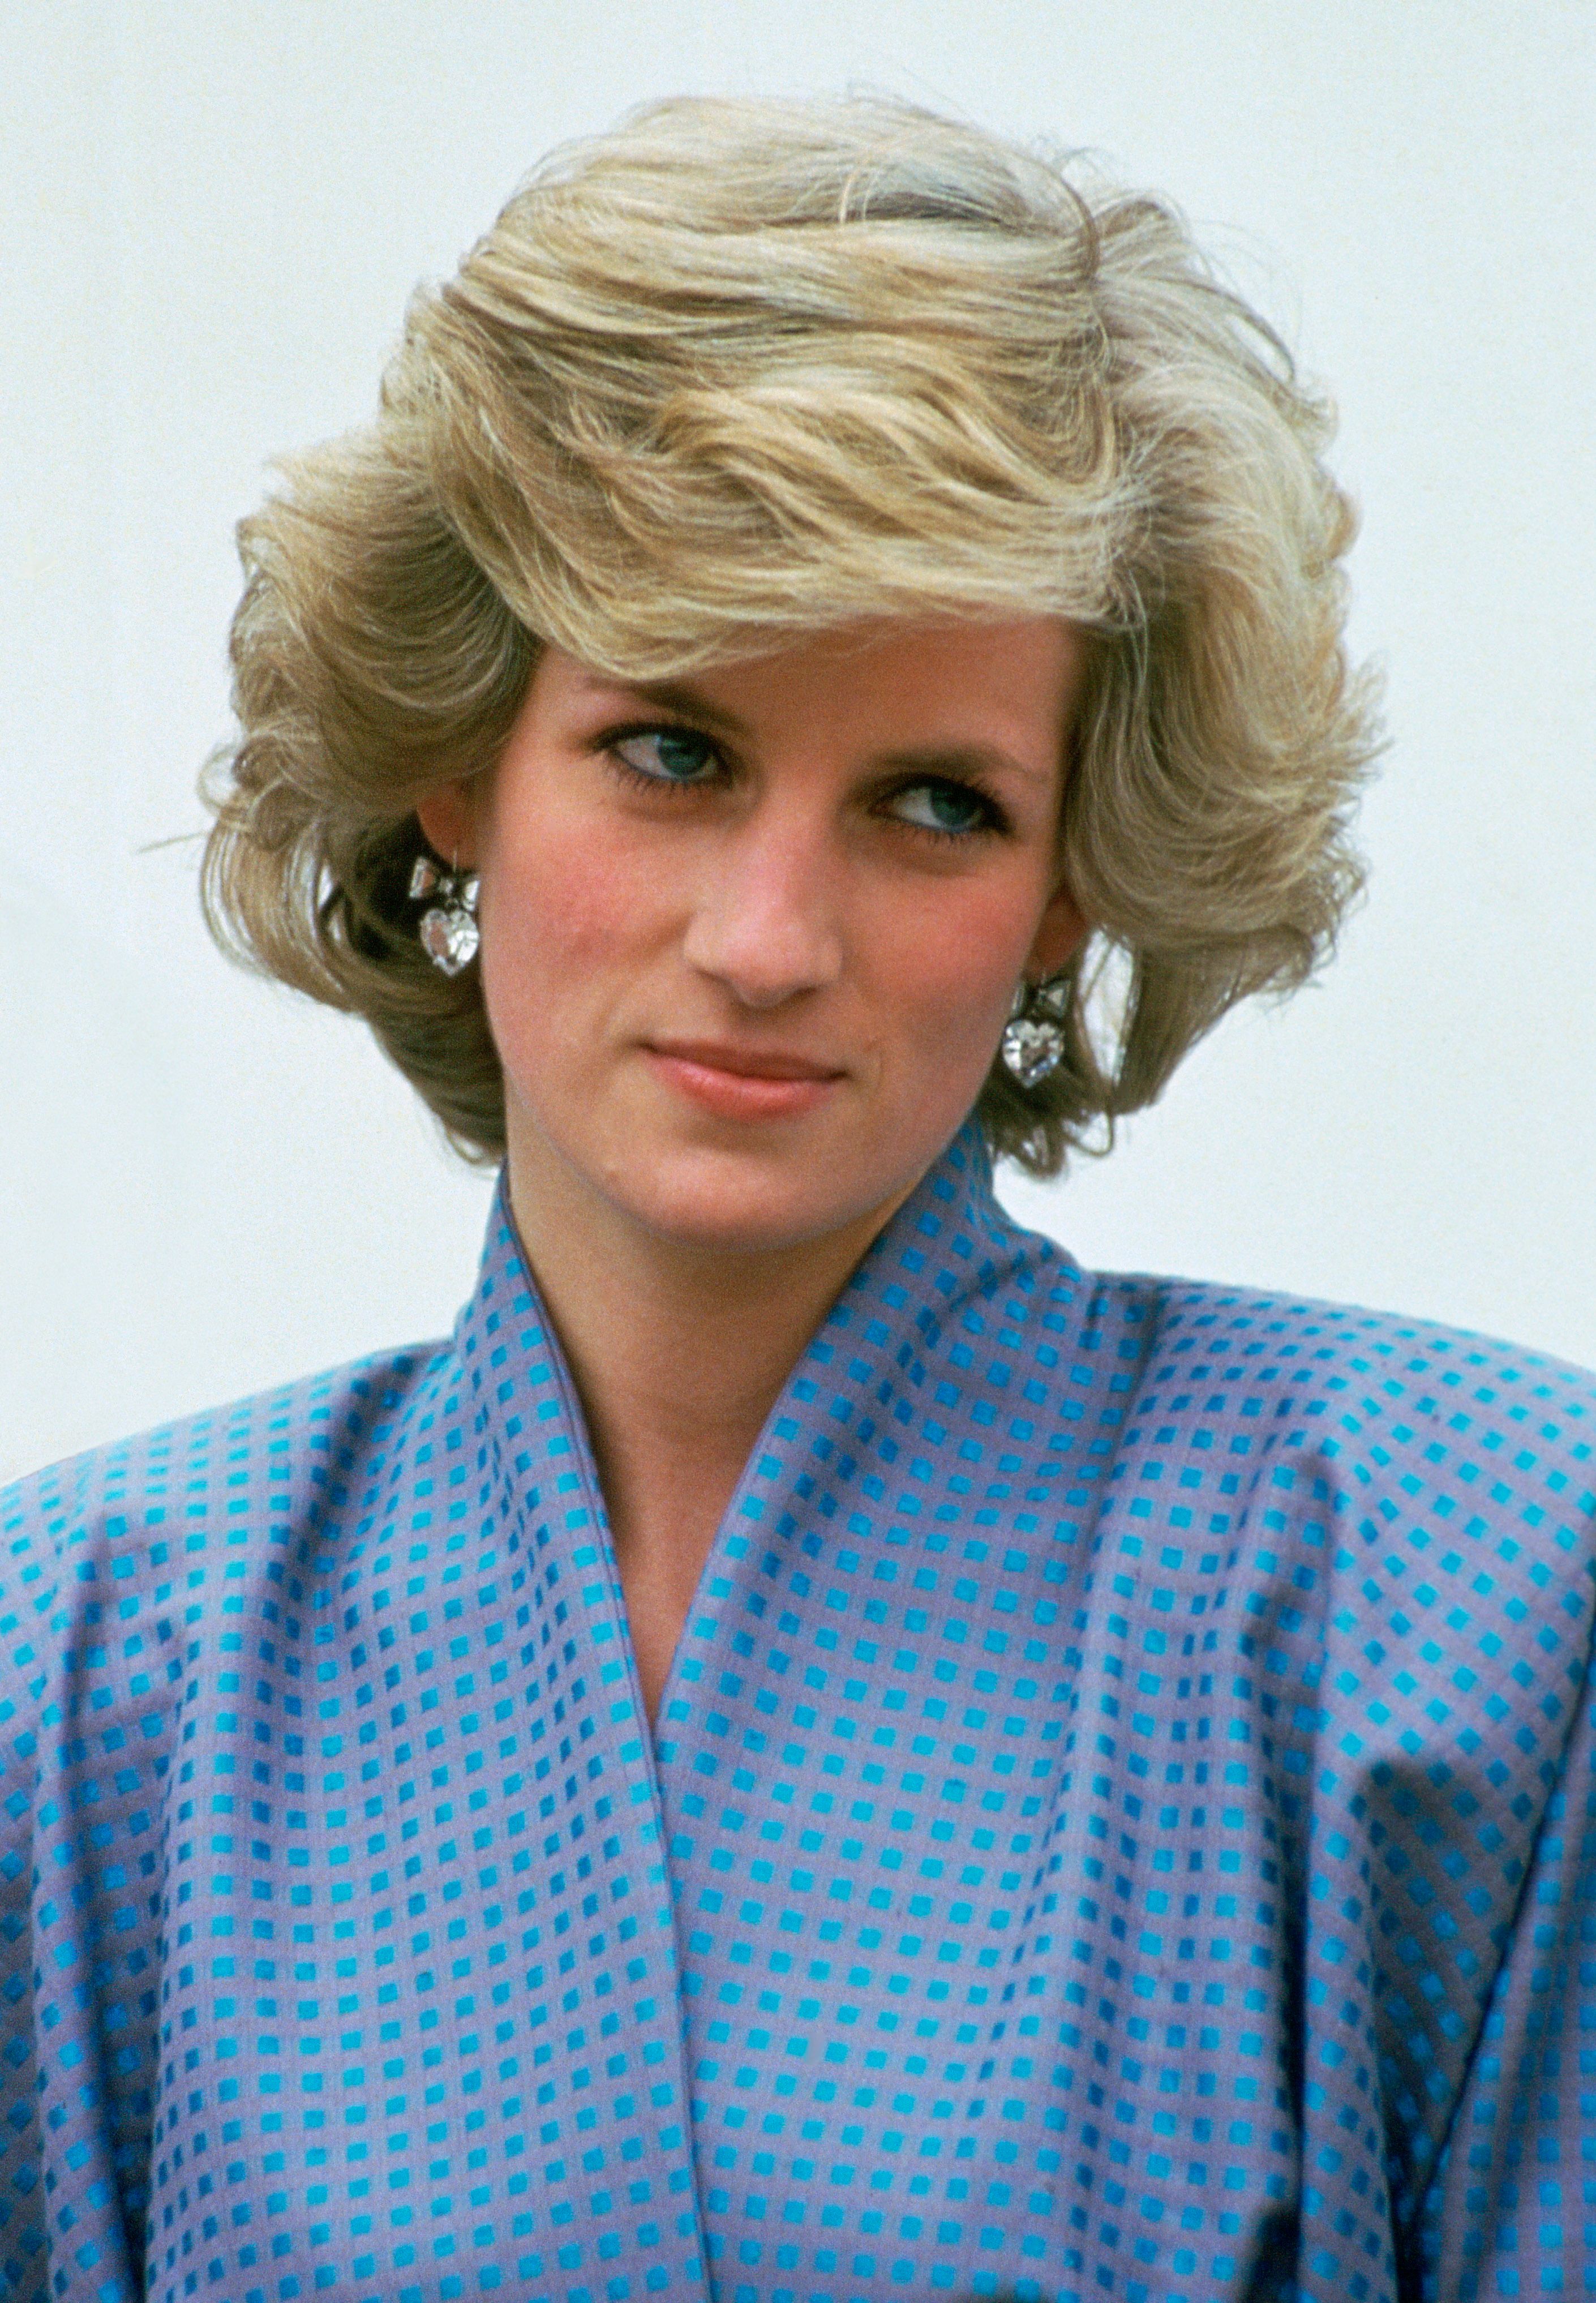 Princess Diana during an overseas visit in Italy on April 22. | Source: Getty Images